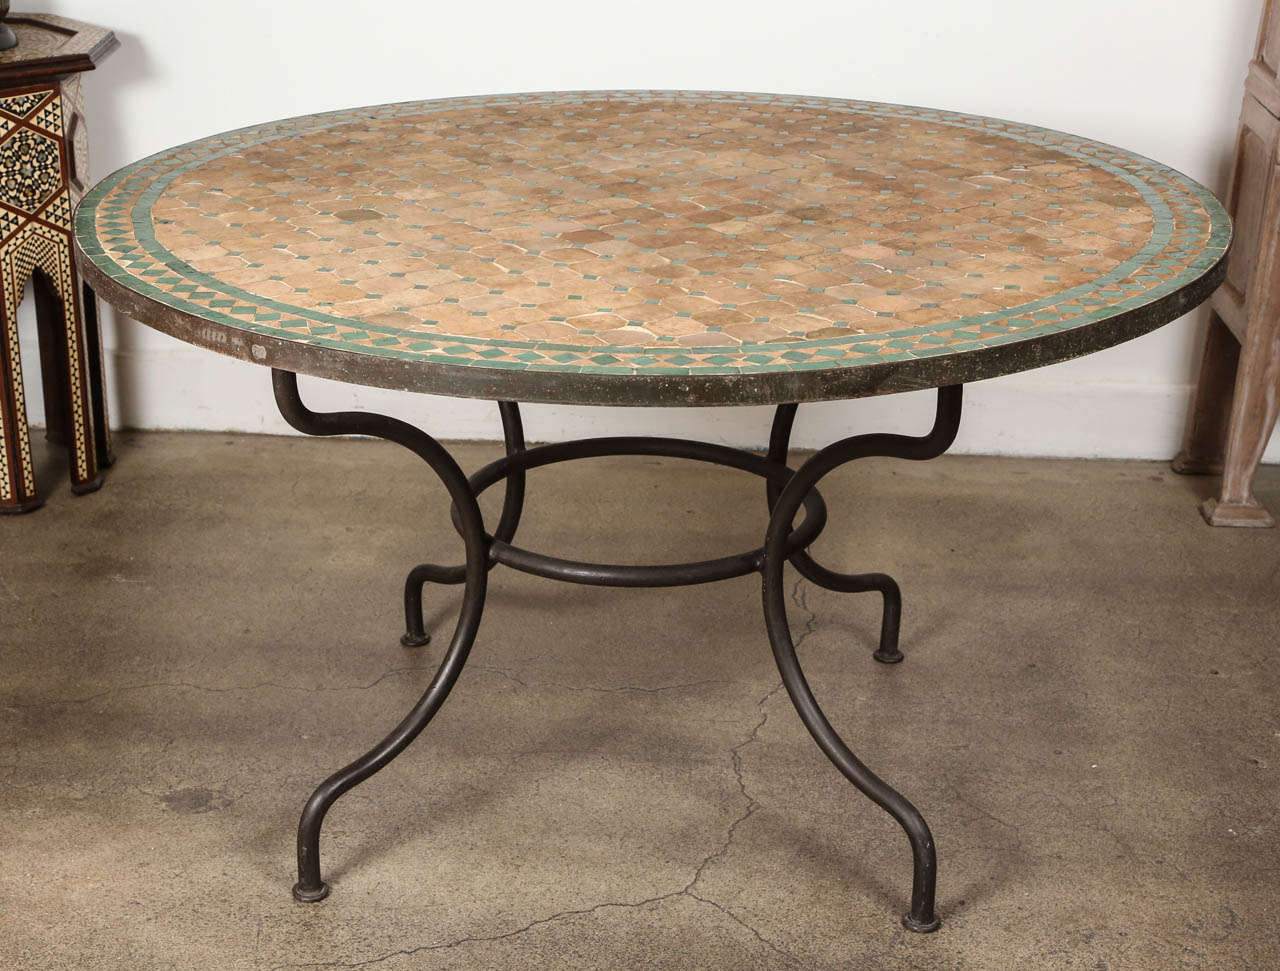 Traditional Moroccan green and tan mosaic tile table, dining height, could be used indoor or outdoor. Moroccan Mosaic table tops are hand made of a multitude of ceramic old reclaimed tiles inlaid to create complex colorful design patterns. These are